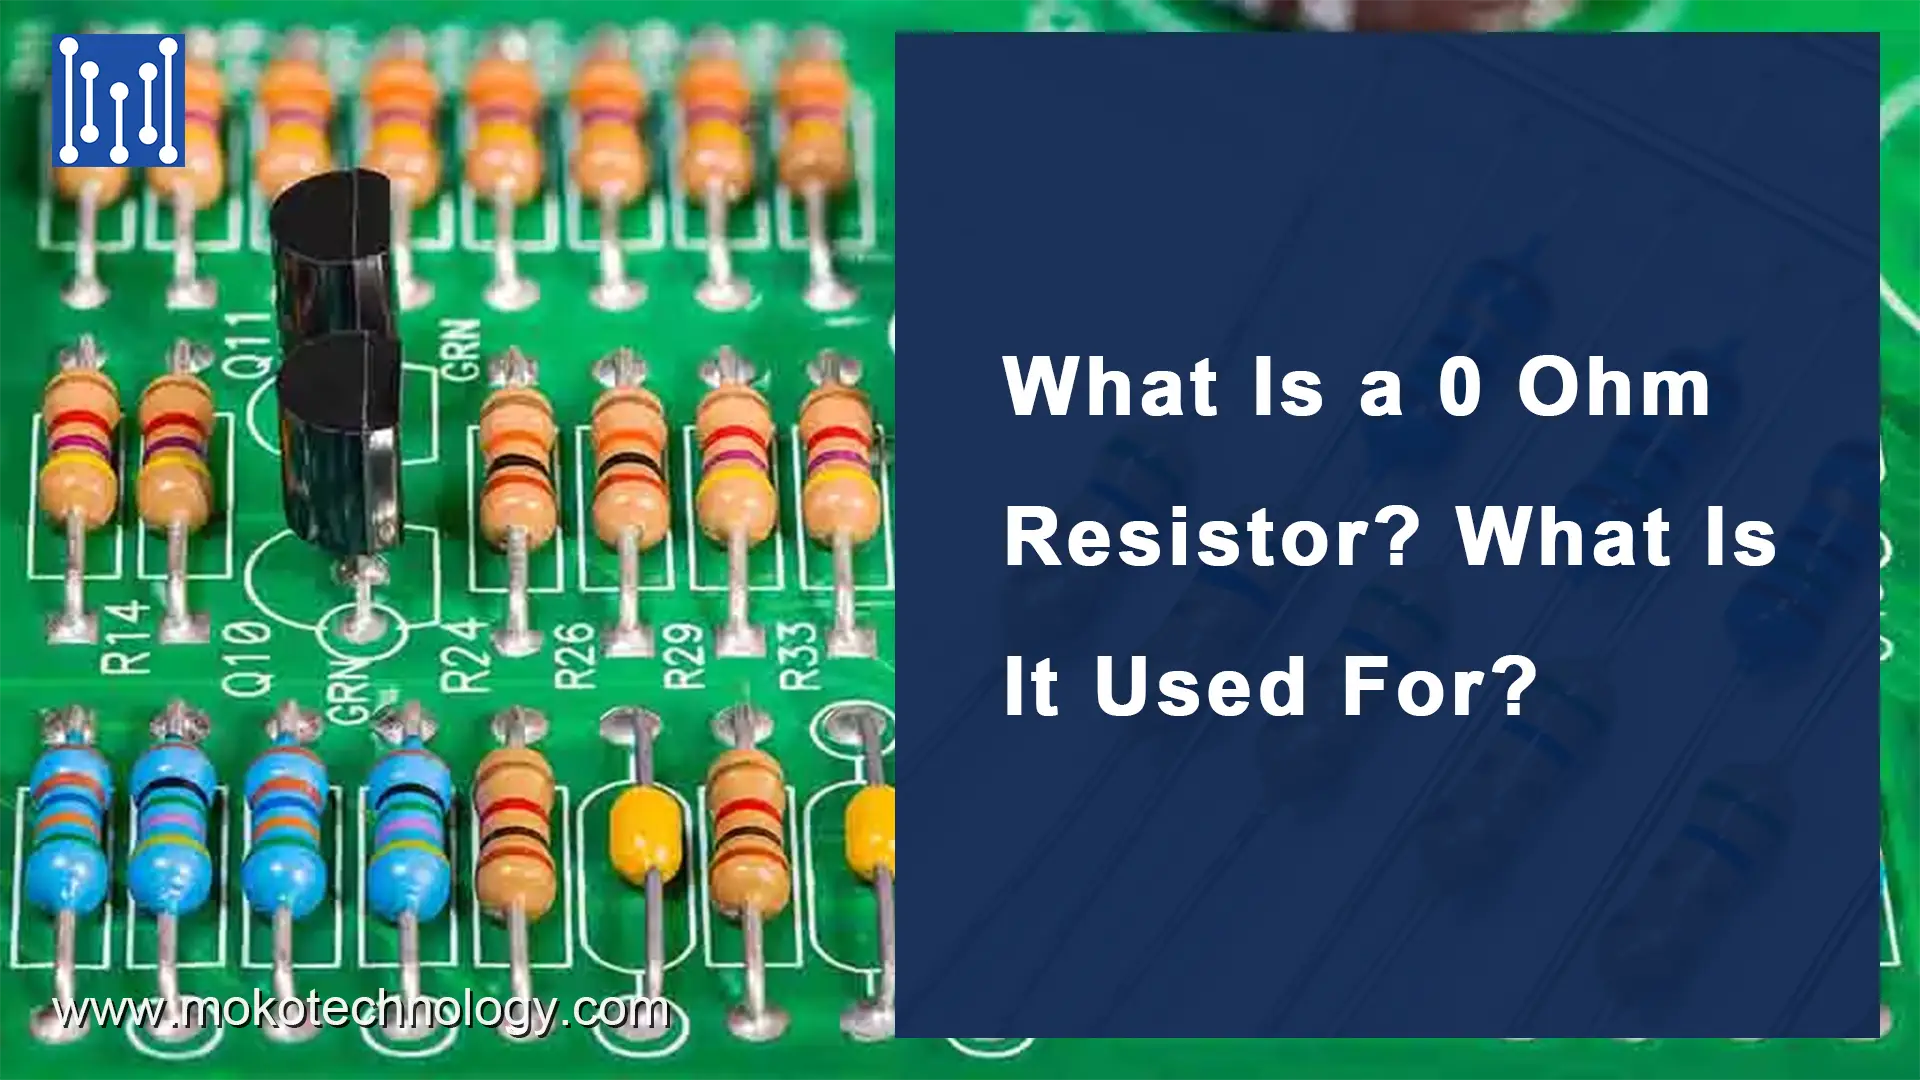 What Is a 0 Ohm Resistor?